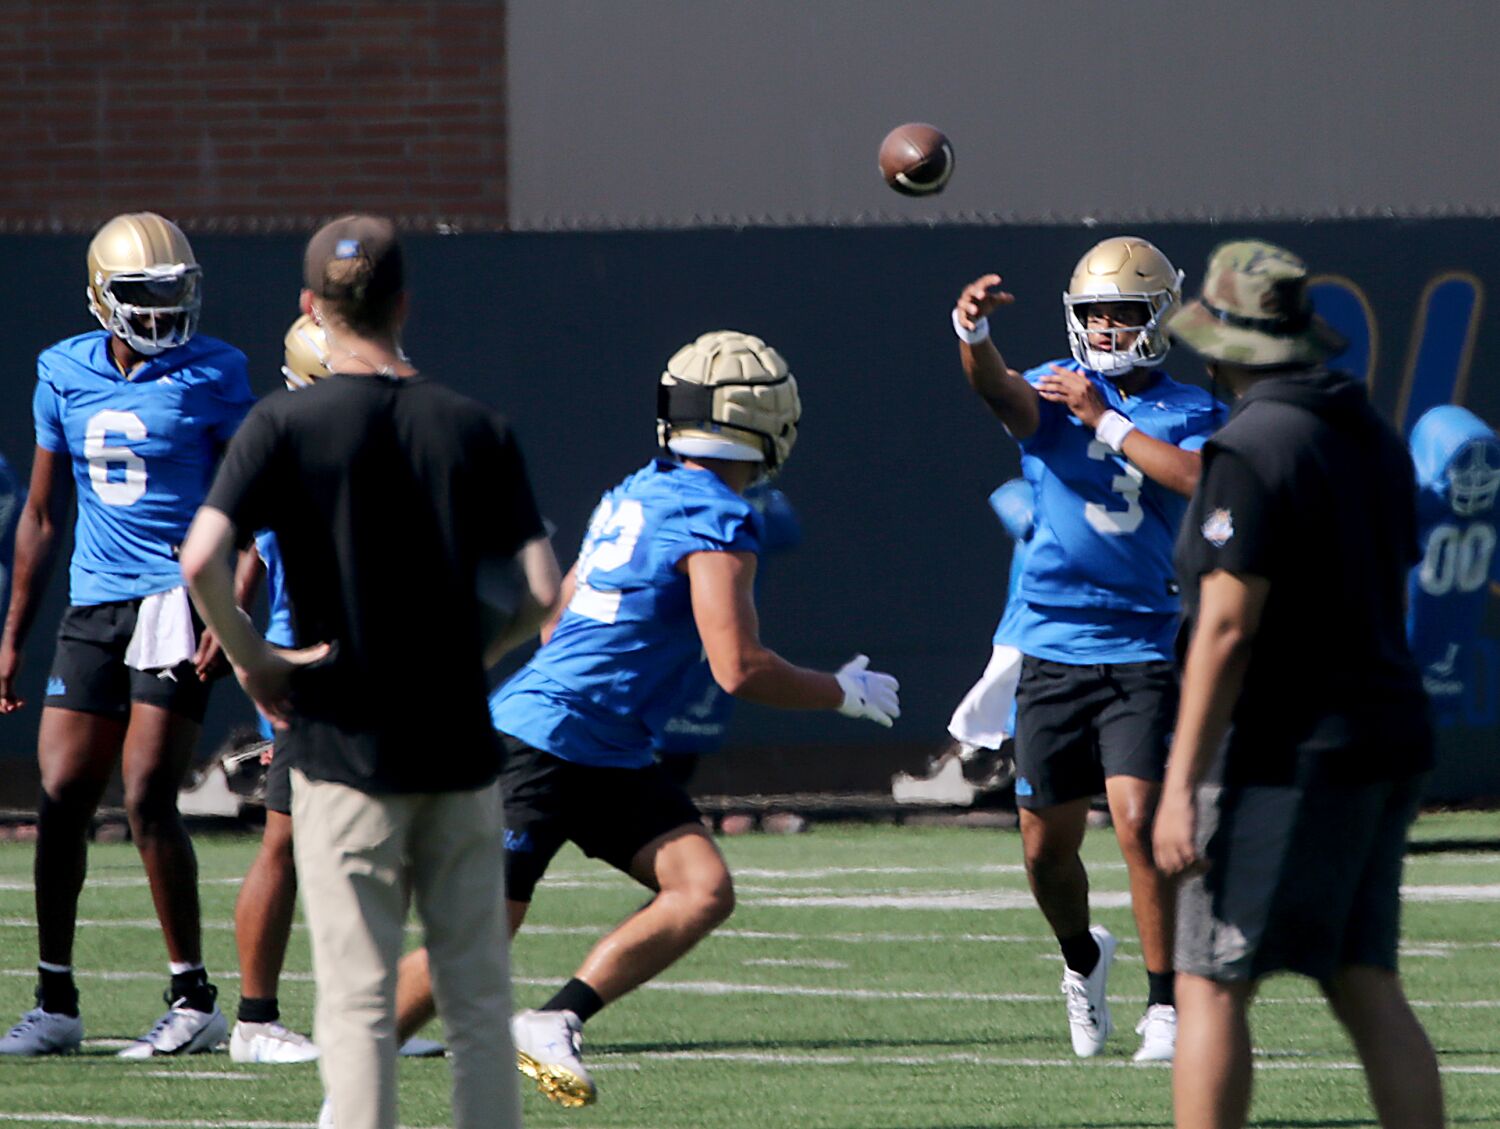 UCLA training camp takeaways: Plenty of roster depth, speed and a quick learner